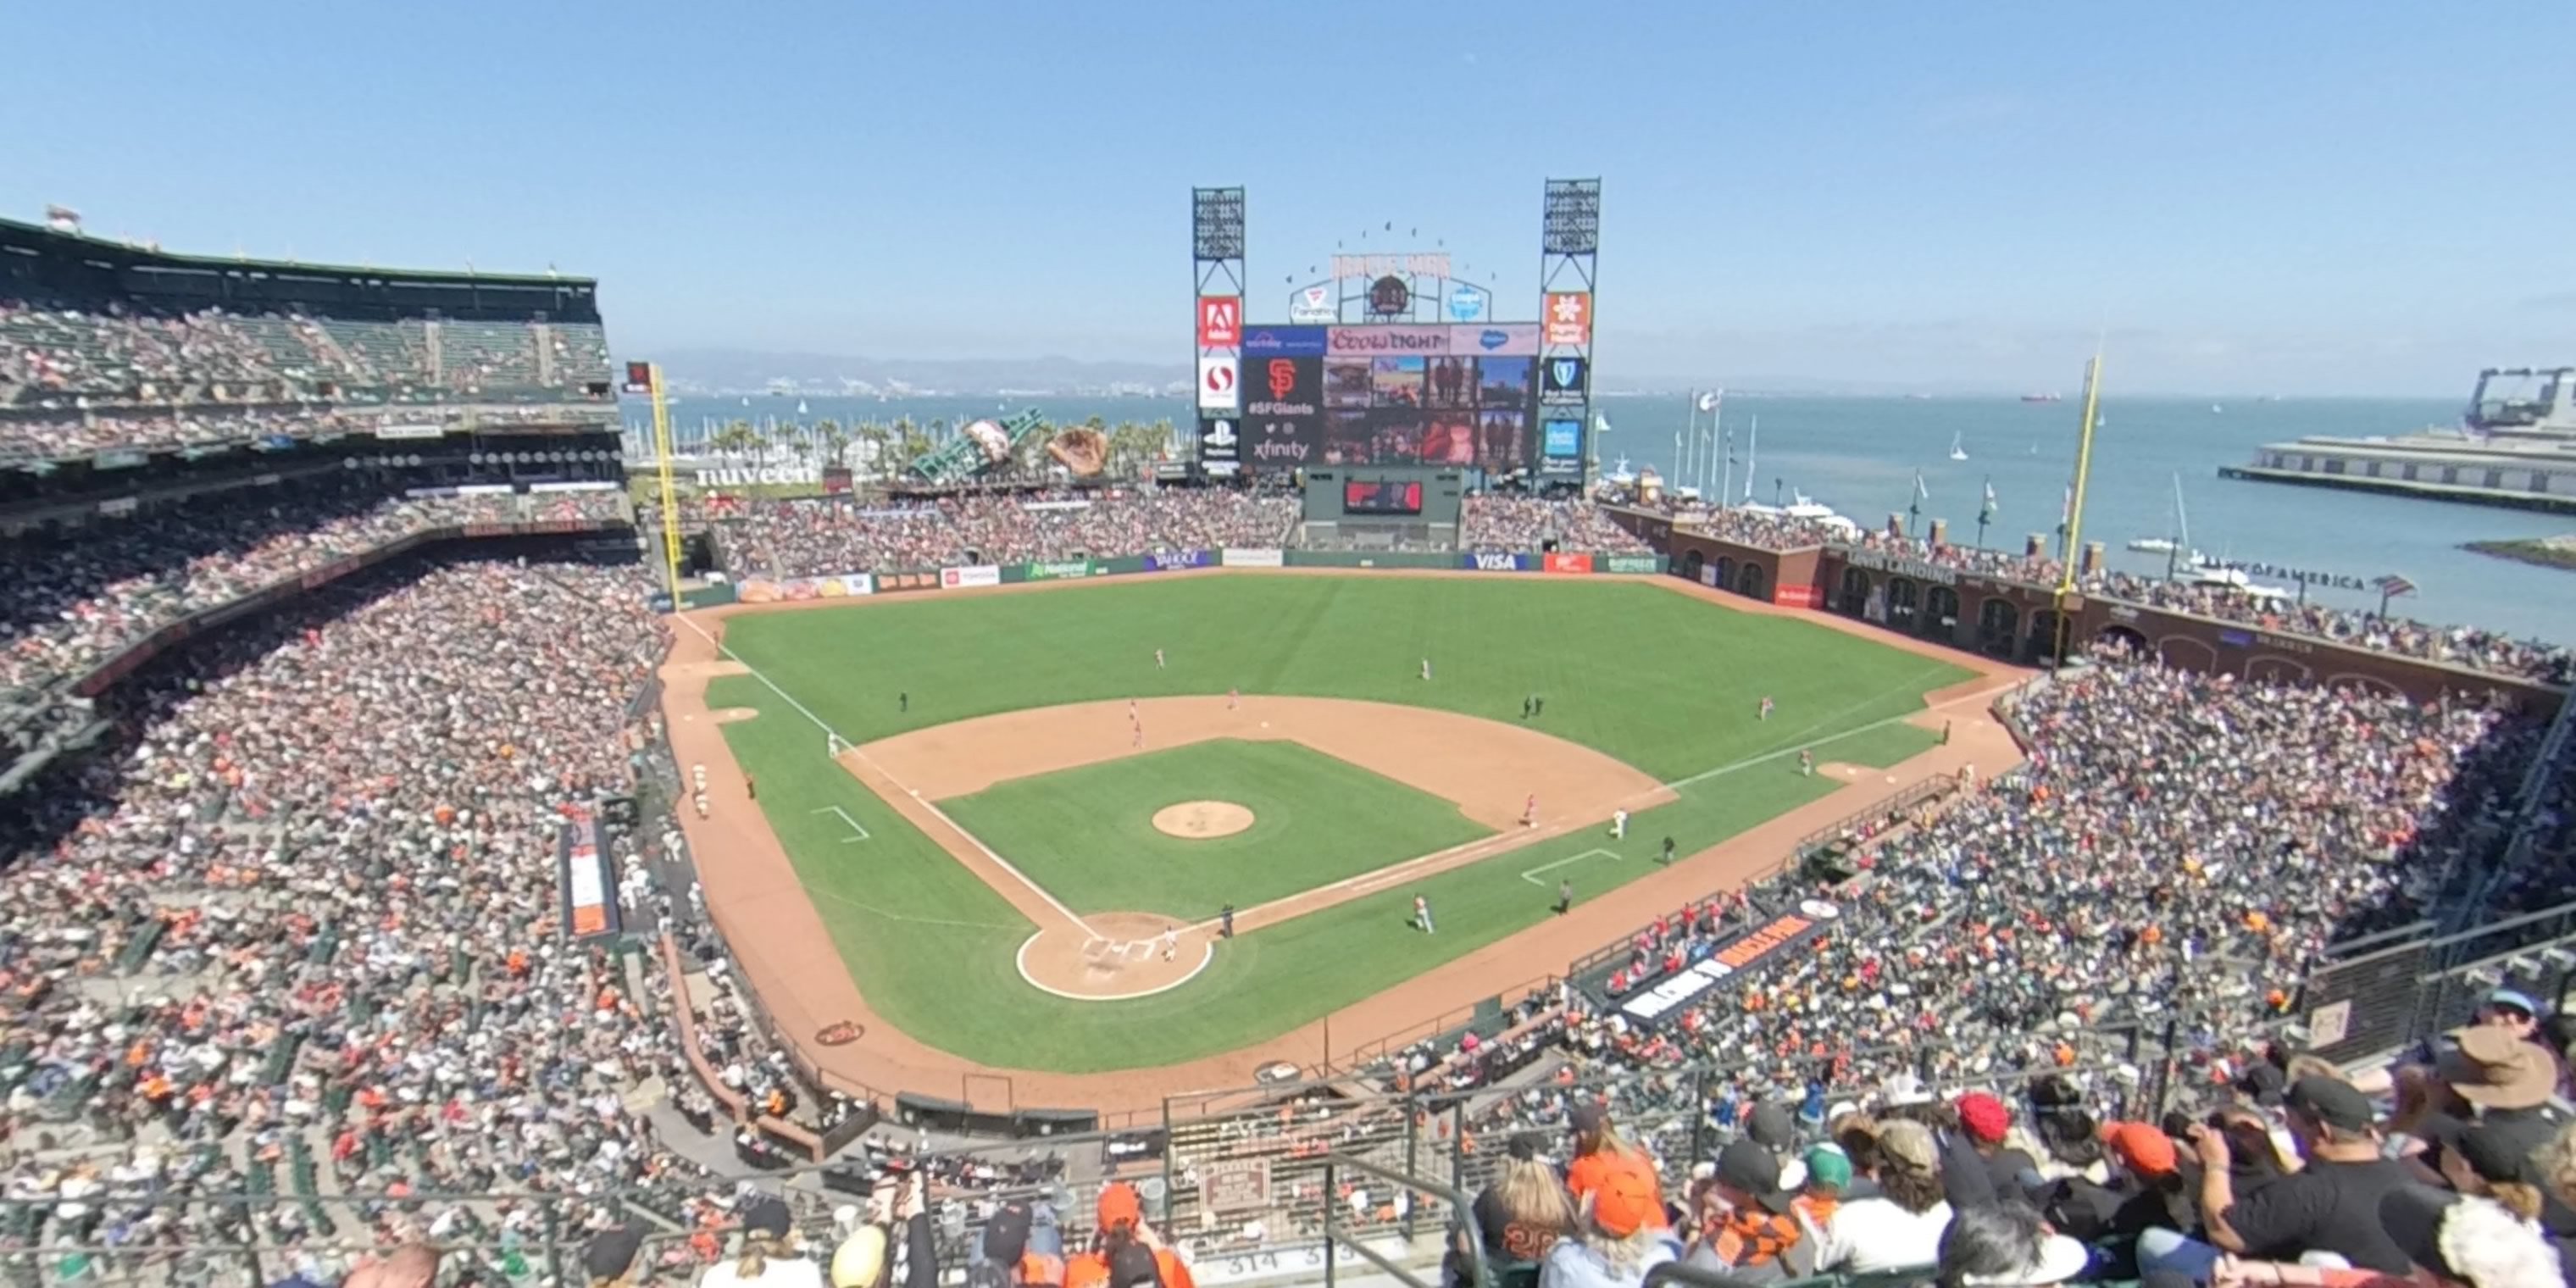 section 313 panoramic seat view  for baseball - oracle park